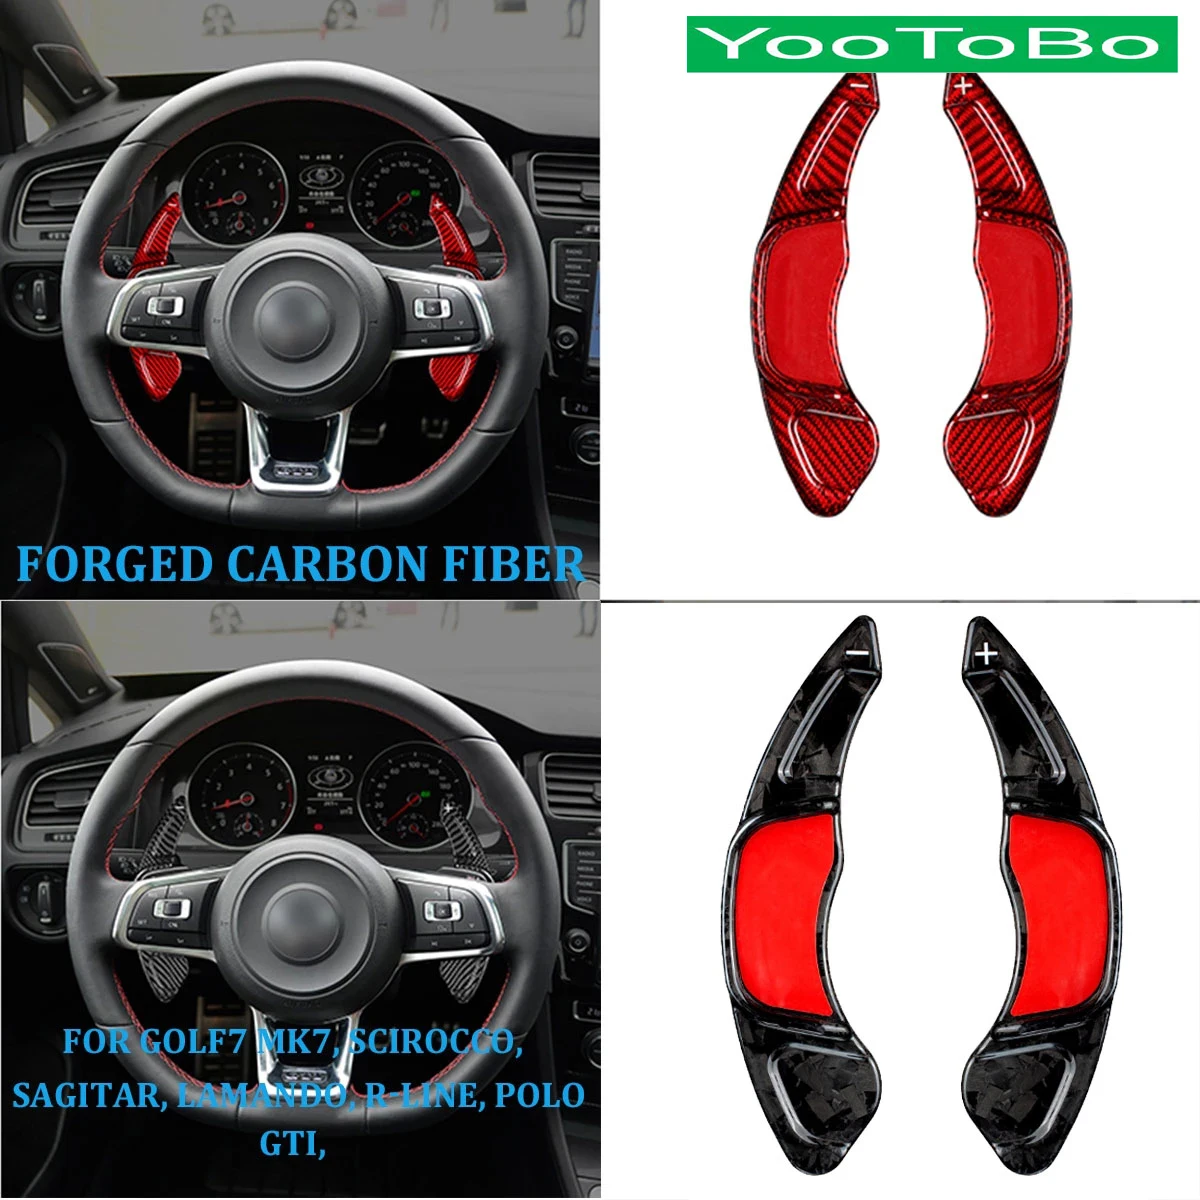 

Forged Carbon Fiber Steering Wheel Paddle Shifter Extension For Volkswagen GOLF7 MK7 Scirocco Sagitar Lamando R-Line POLO GTI